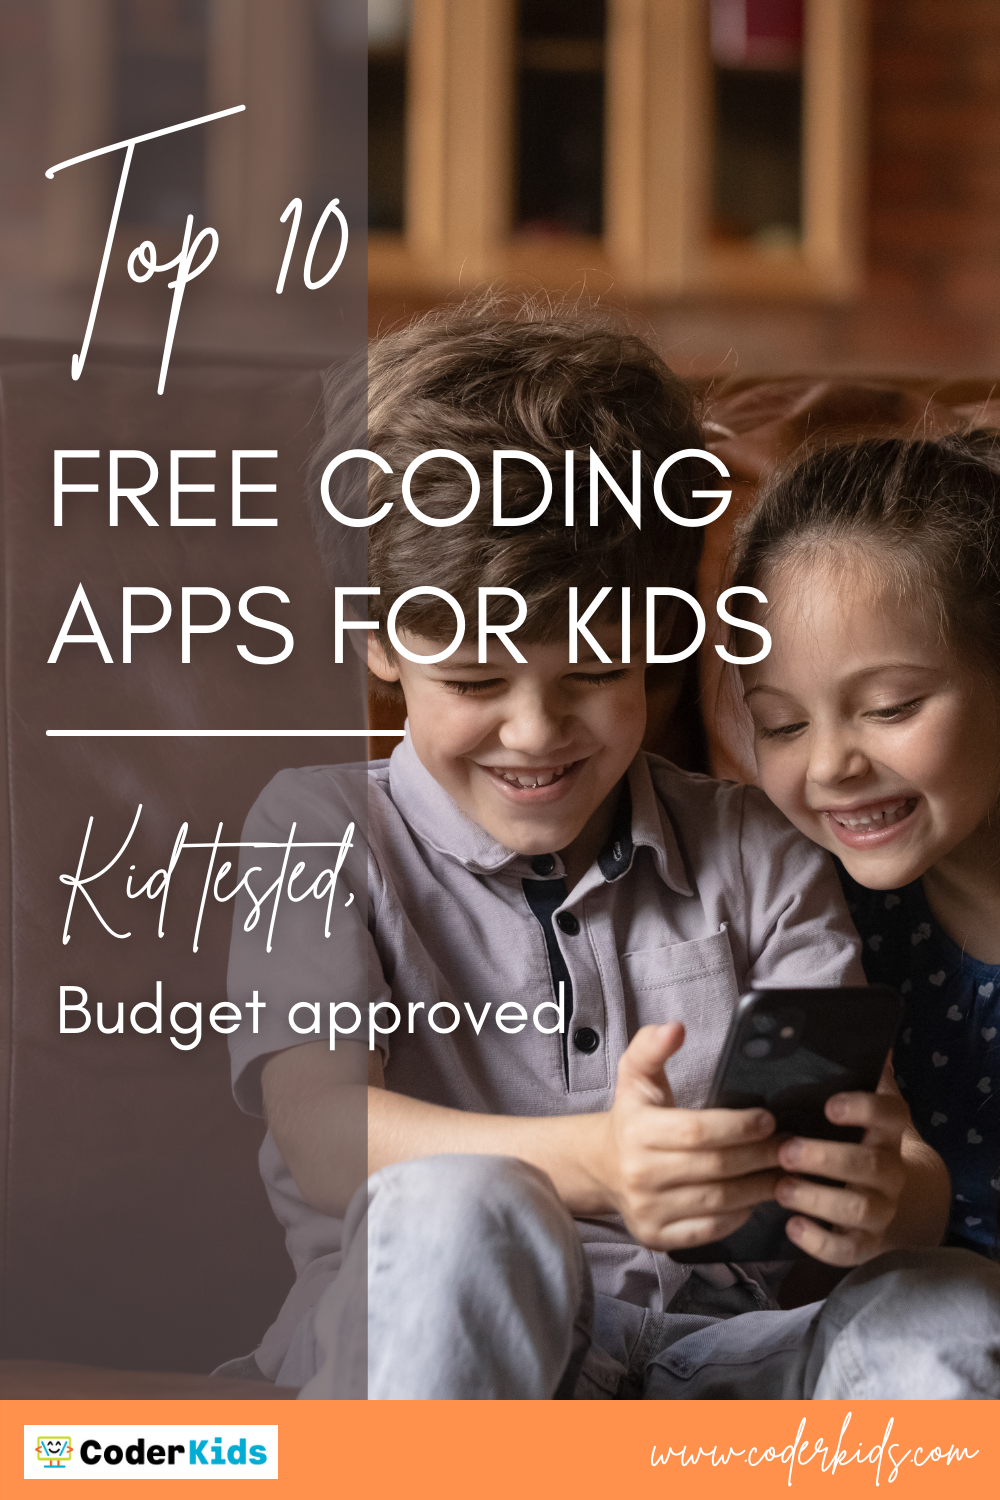 15+ Totally FREE Coding for Kids Websites & Apps for 5-15 Years